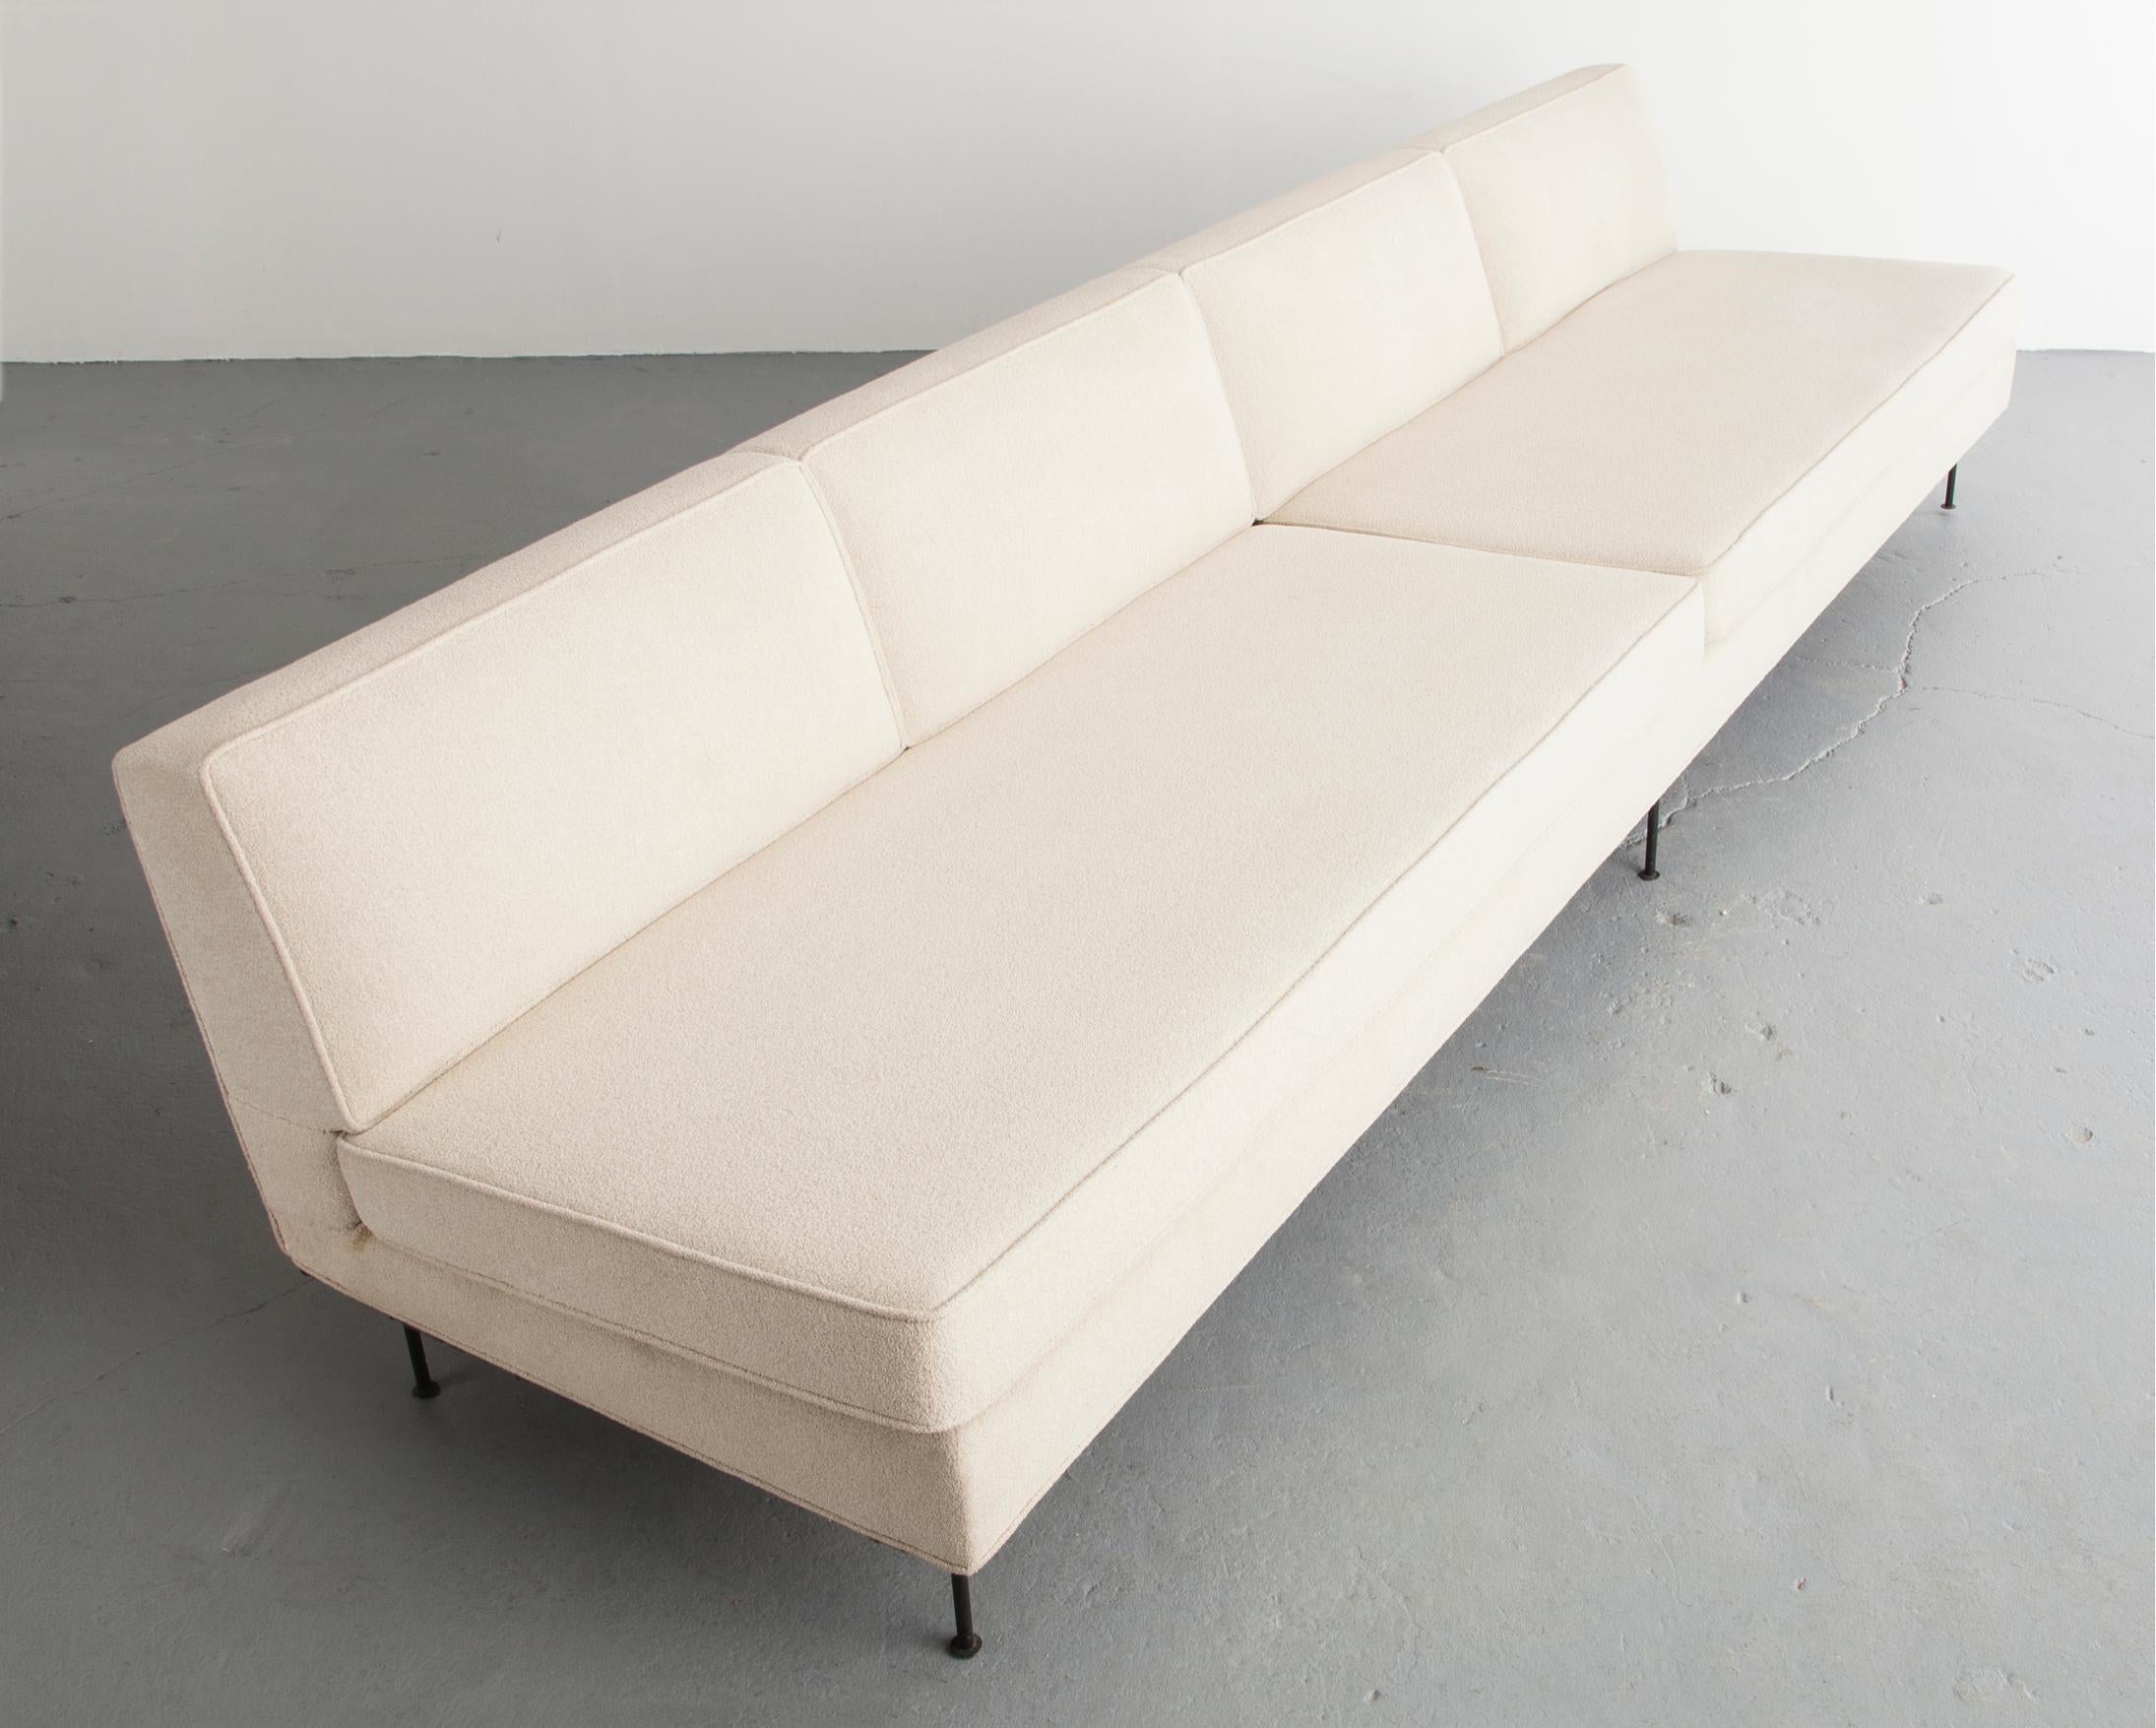 Custom upholstered four-seat sofa. Designed by Greta Magnusson Grossman and produced by Barker Brothers for the 